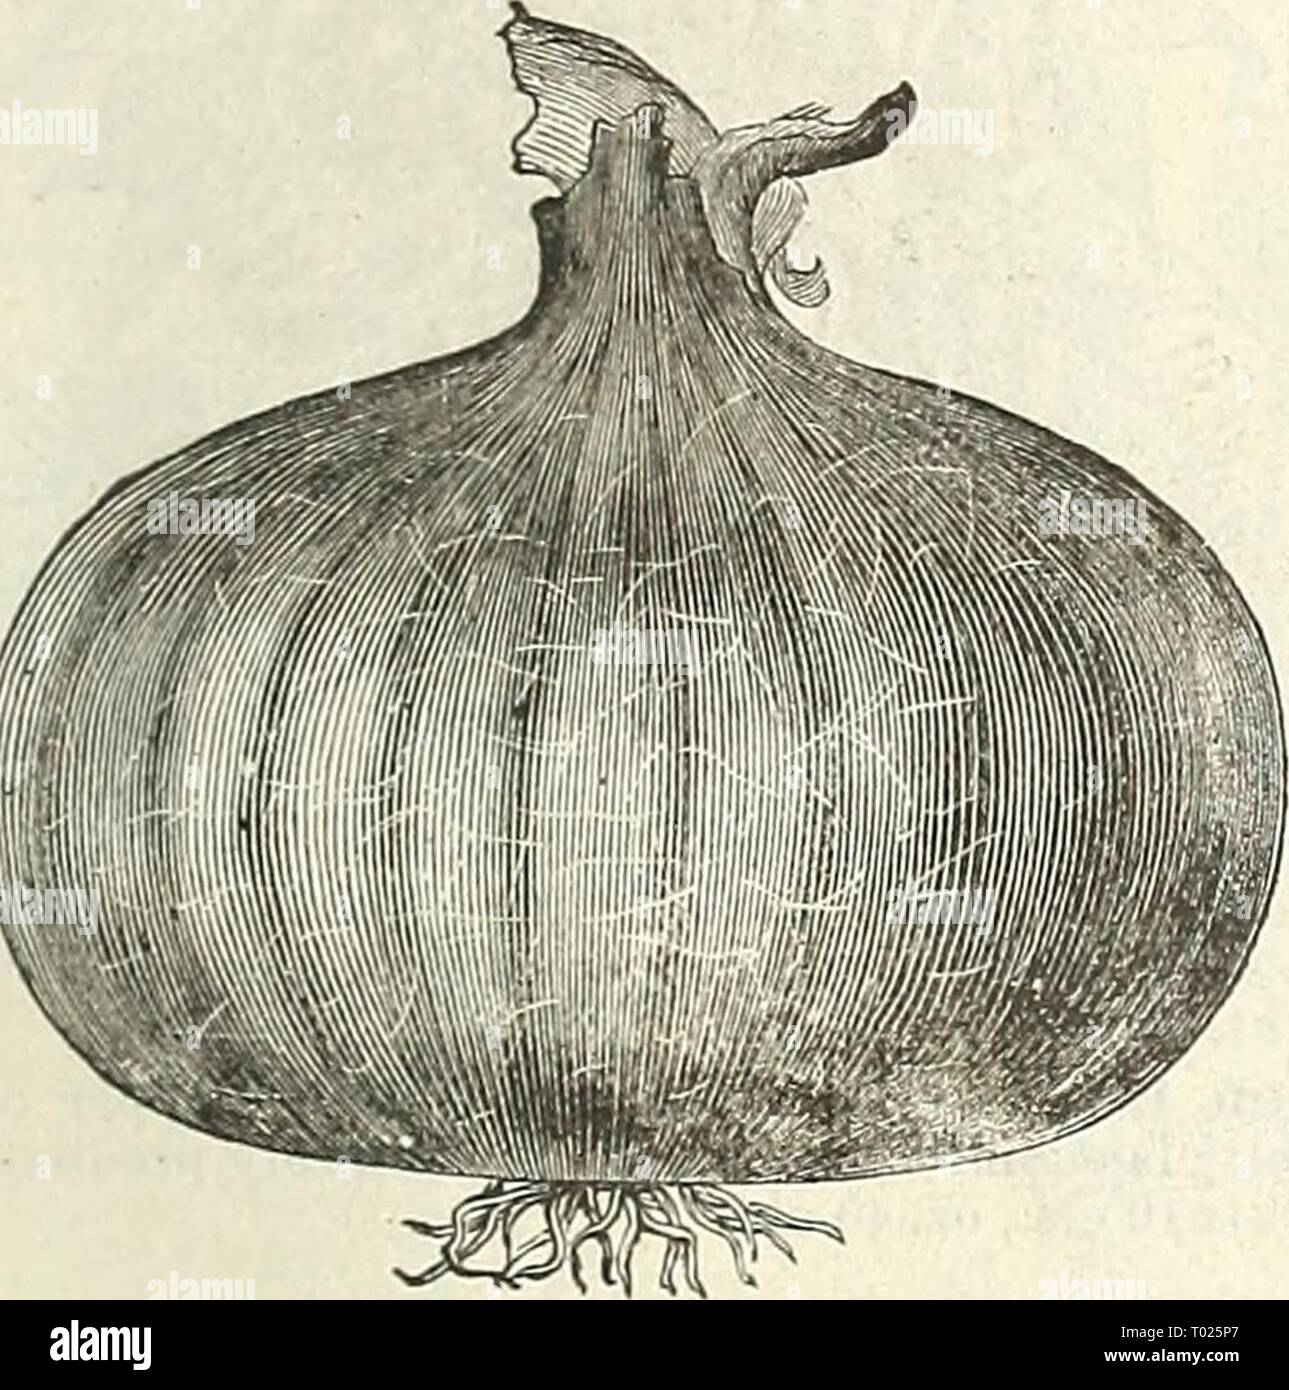 Dreer's garden calendar : 1889 . dreersgardencale1889henr Year: 1889  Mammoth Silvkk King. .Mammoth Silver King. This is the largest of the white Italian Onions and attains an enormous size in one season from seed. 'I'his sort is deserving of exten- sive cultivation, and will be found especially service- able in the family garden, as it is of mild flavor, attrac- tive appearance and form, and a good keeper. Pkt. 10 cts., oz. 35 cts., i lb. ^:lb.    Red Bassano, or Brown Genoa. Red Bassano, or Brown Genoa. A large, deep- reddish broom variety, resembling somewhat the Ber- muda type. It is an e Stock Photo